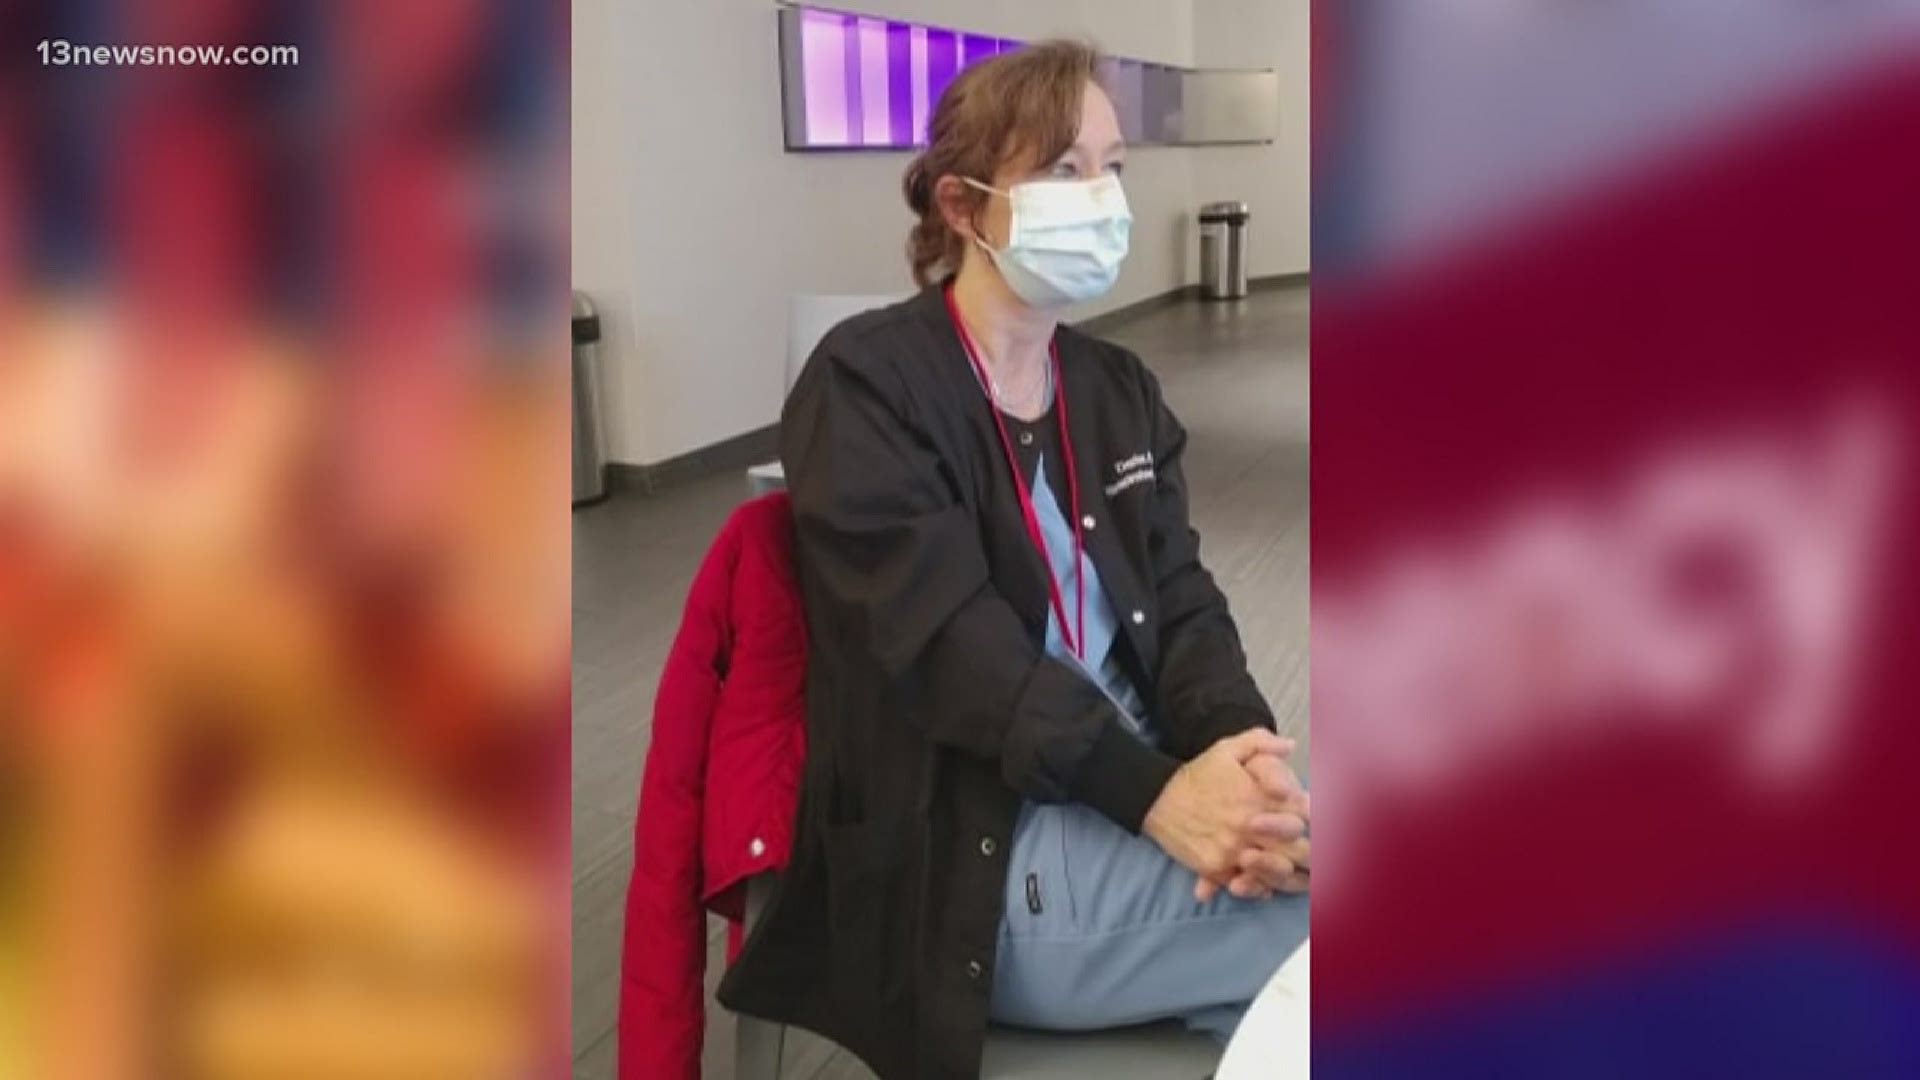 "I'm feeling very proud. I'm tired, but I expected that." A local respiratory therapist went to fight coronavirus in New York - she said hospitals there are packed.